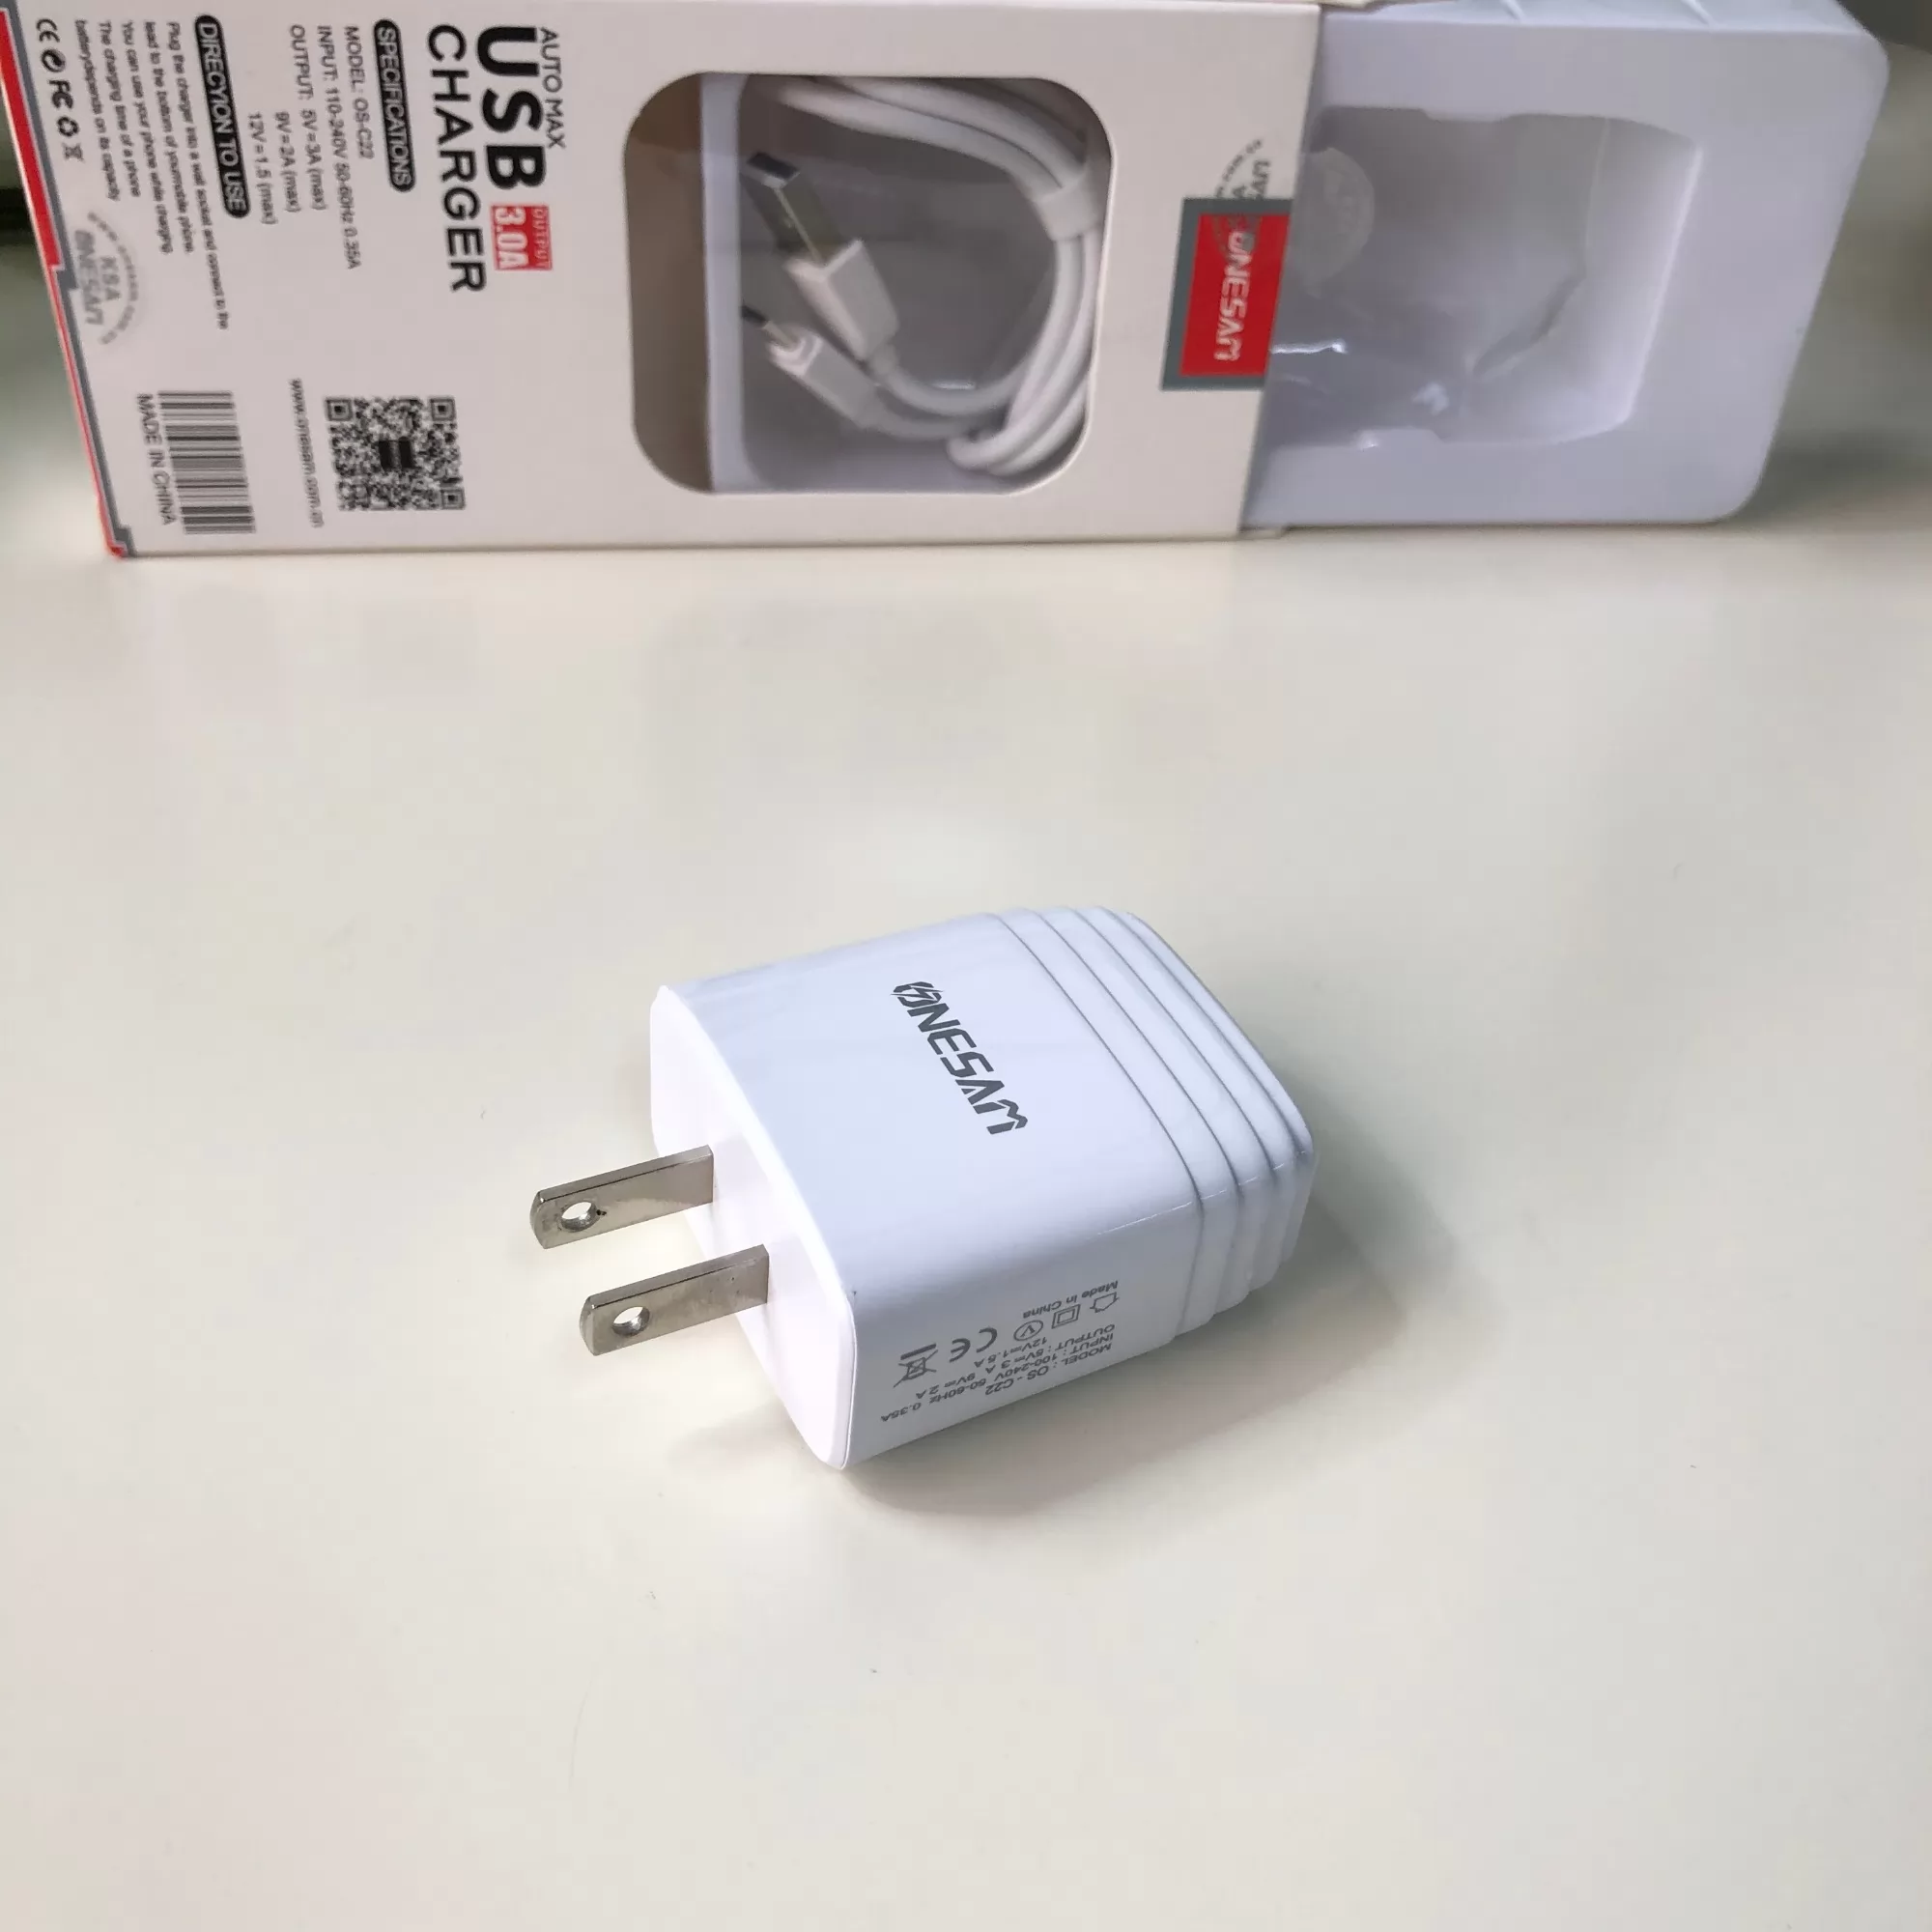 GK-WC008 Wall Charger